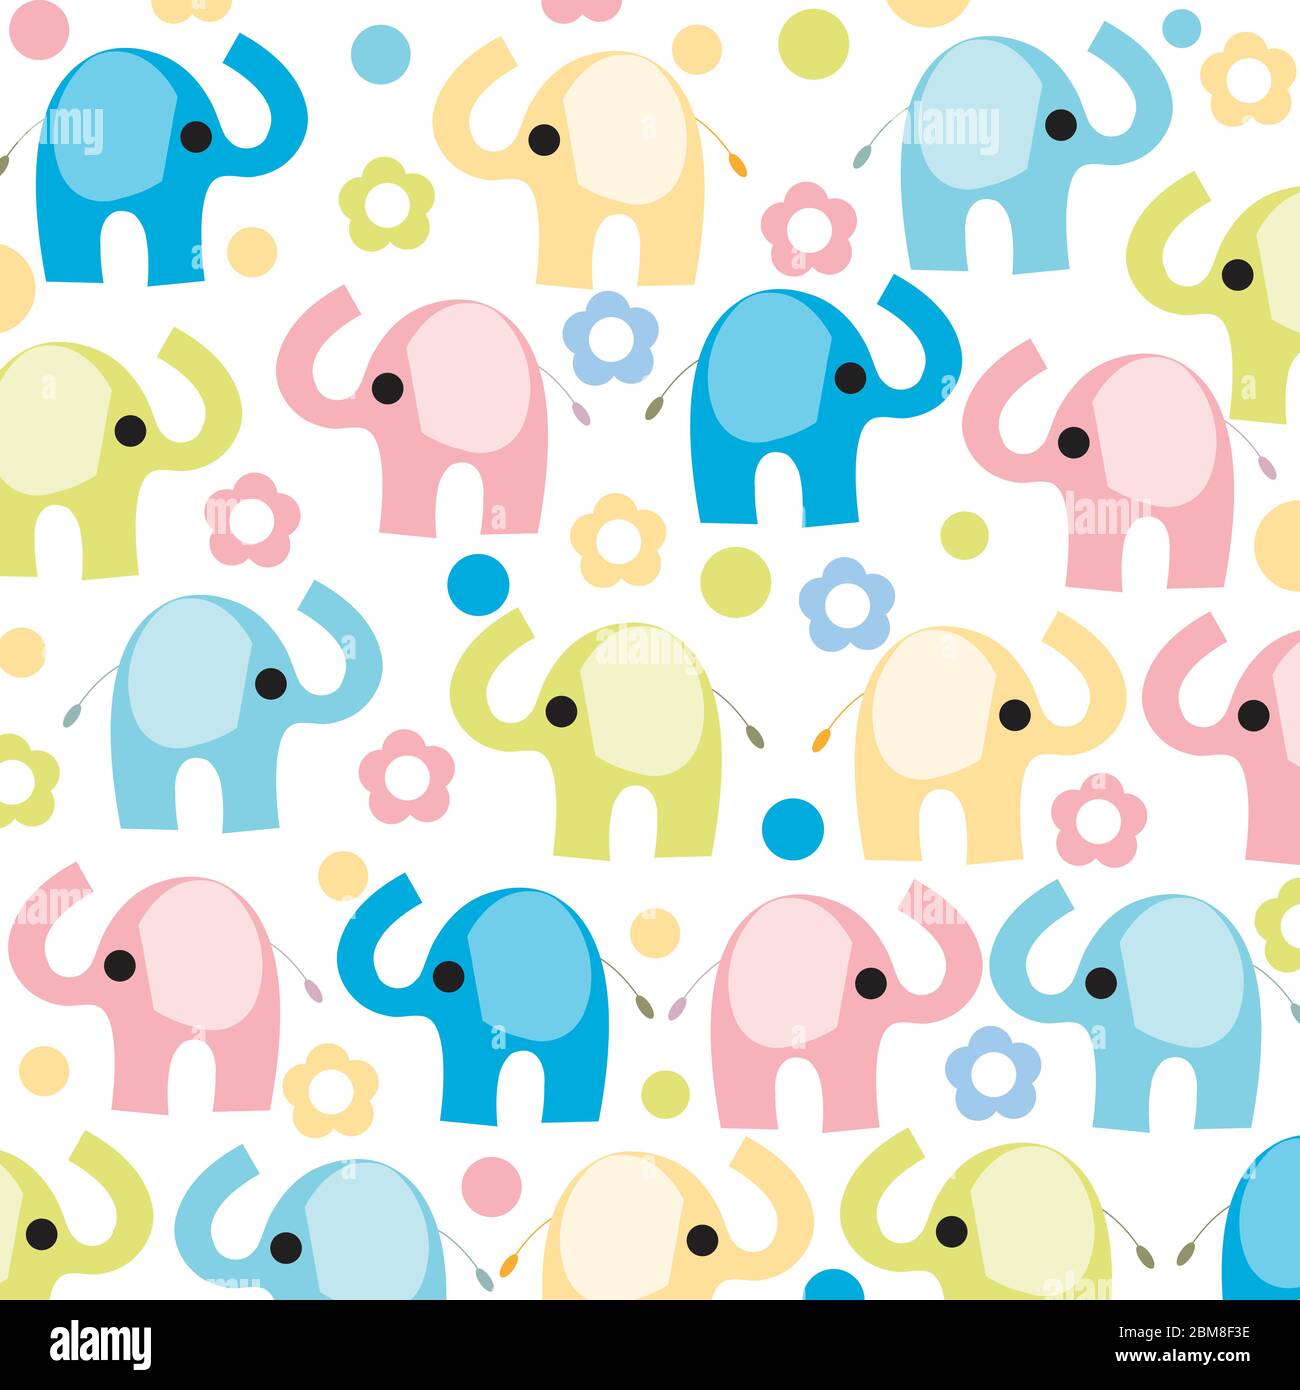 Colorful elephant with flowers vector wallpaper Stock Vector Image ...